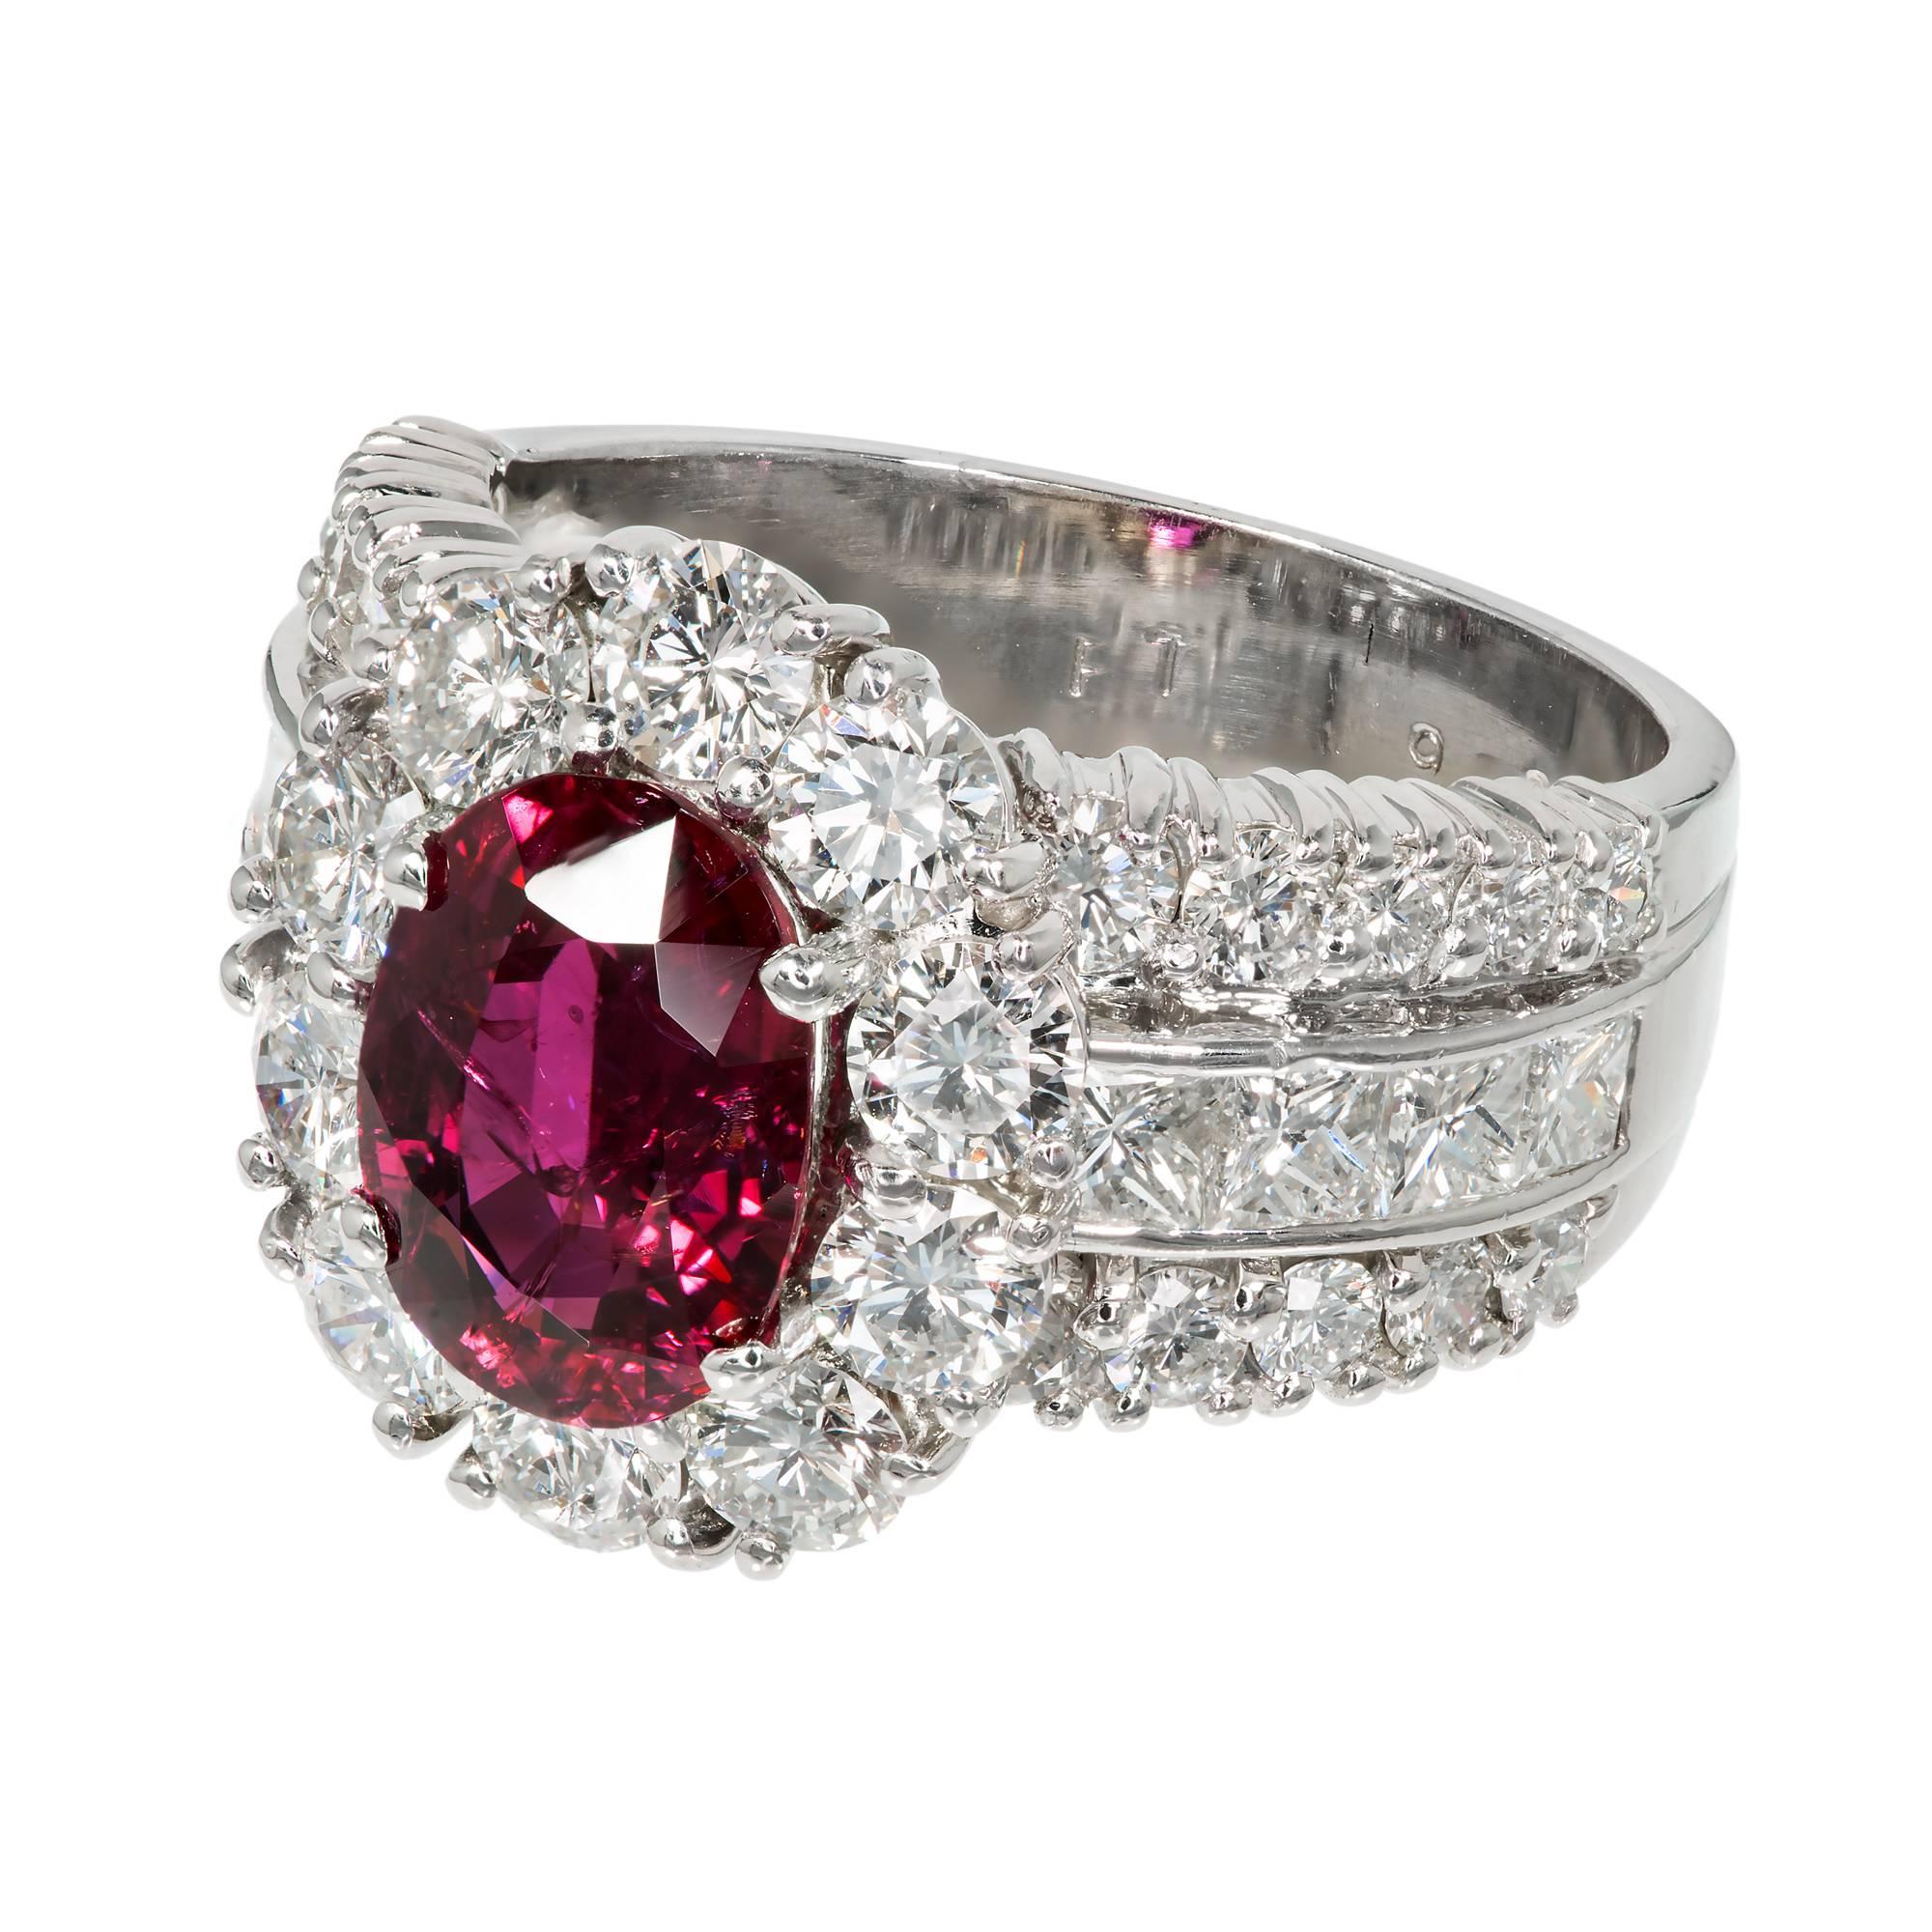 Authentic Hammerman Brothers 1960-1969 Platinum engagement ring with high quality diamonds and a fine top gem bright red clear Ruby AGL certified as natural color. Low to moderate clarity enhancements.

1 oval red Ruby, approx. total weight 2.98cts,